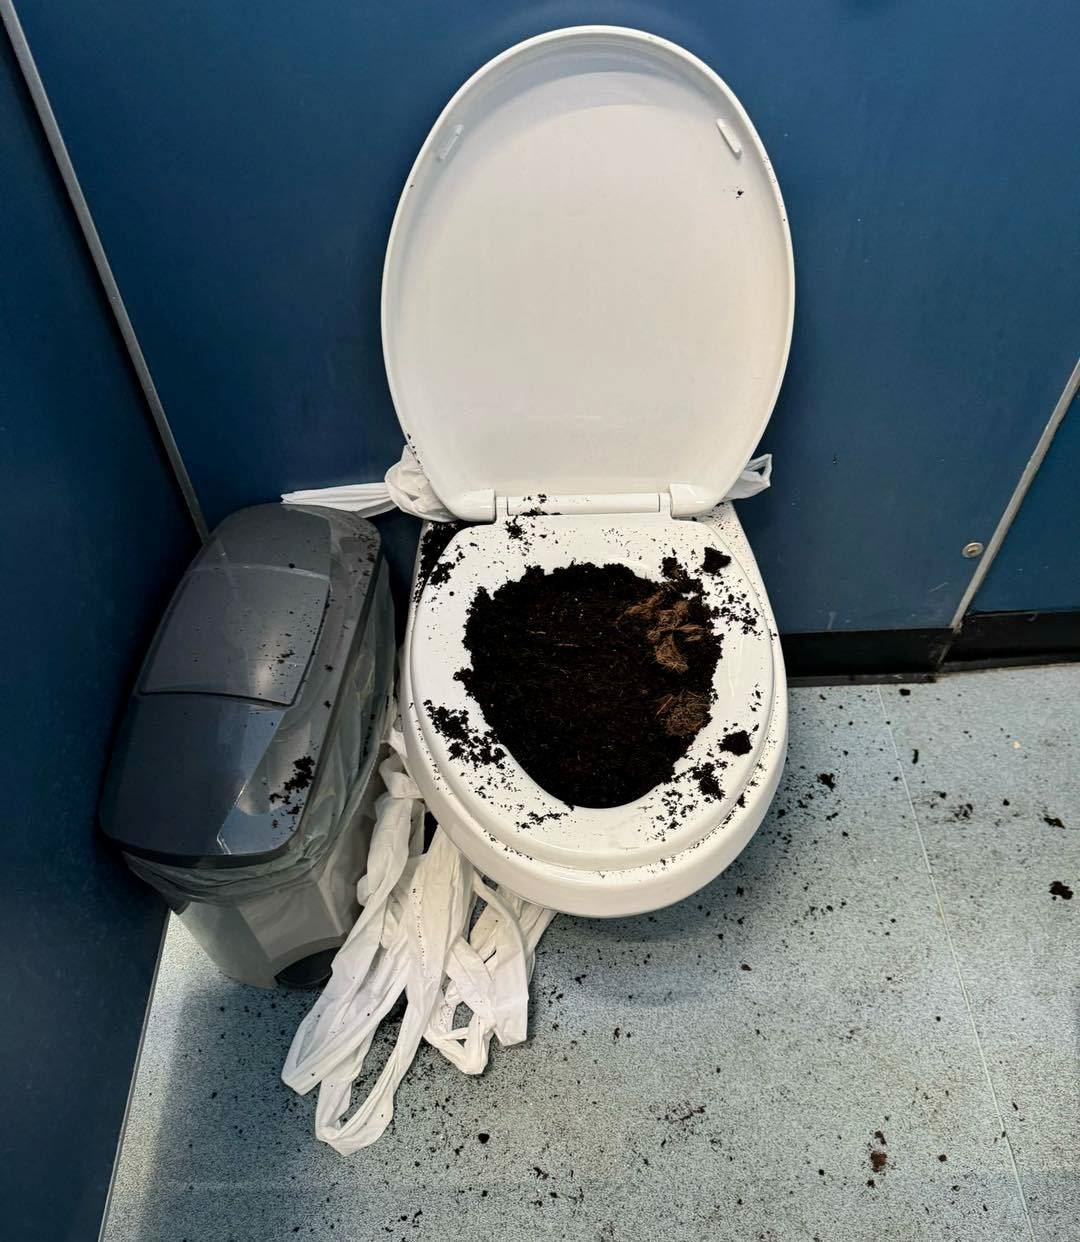 The Kyle of Lochalsh public toilet that has been subject to "acts of vandalism". Picture: Kyle and Lochalsh Community Trust.